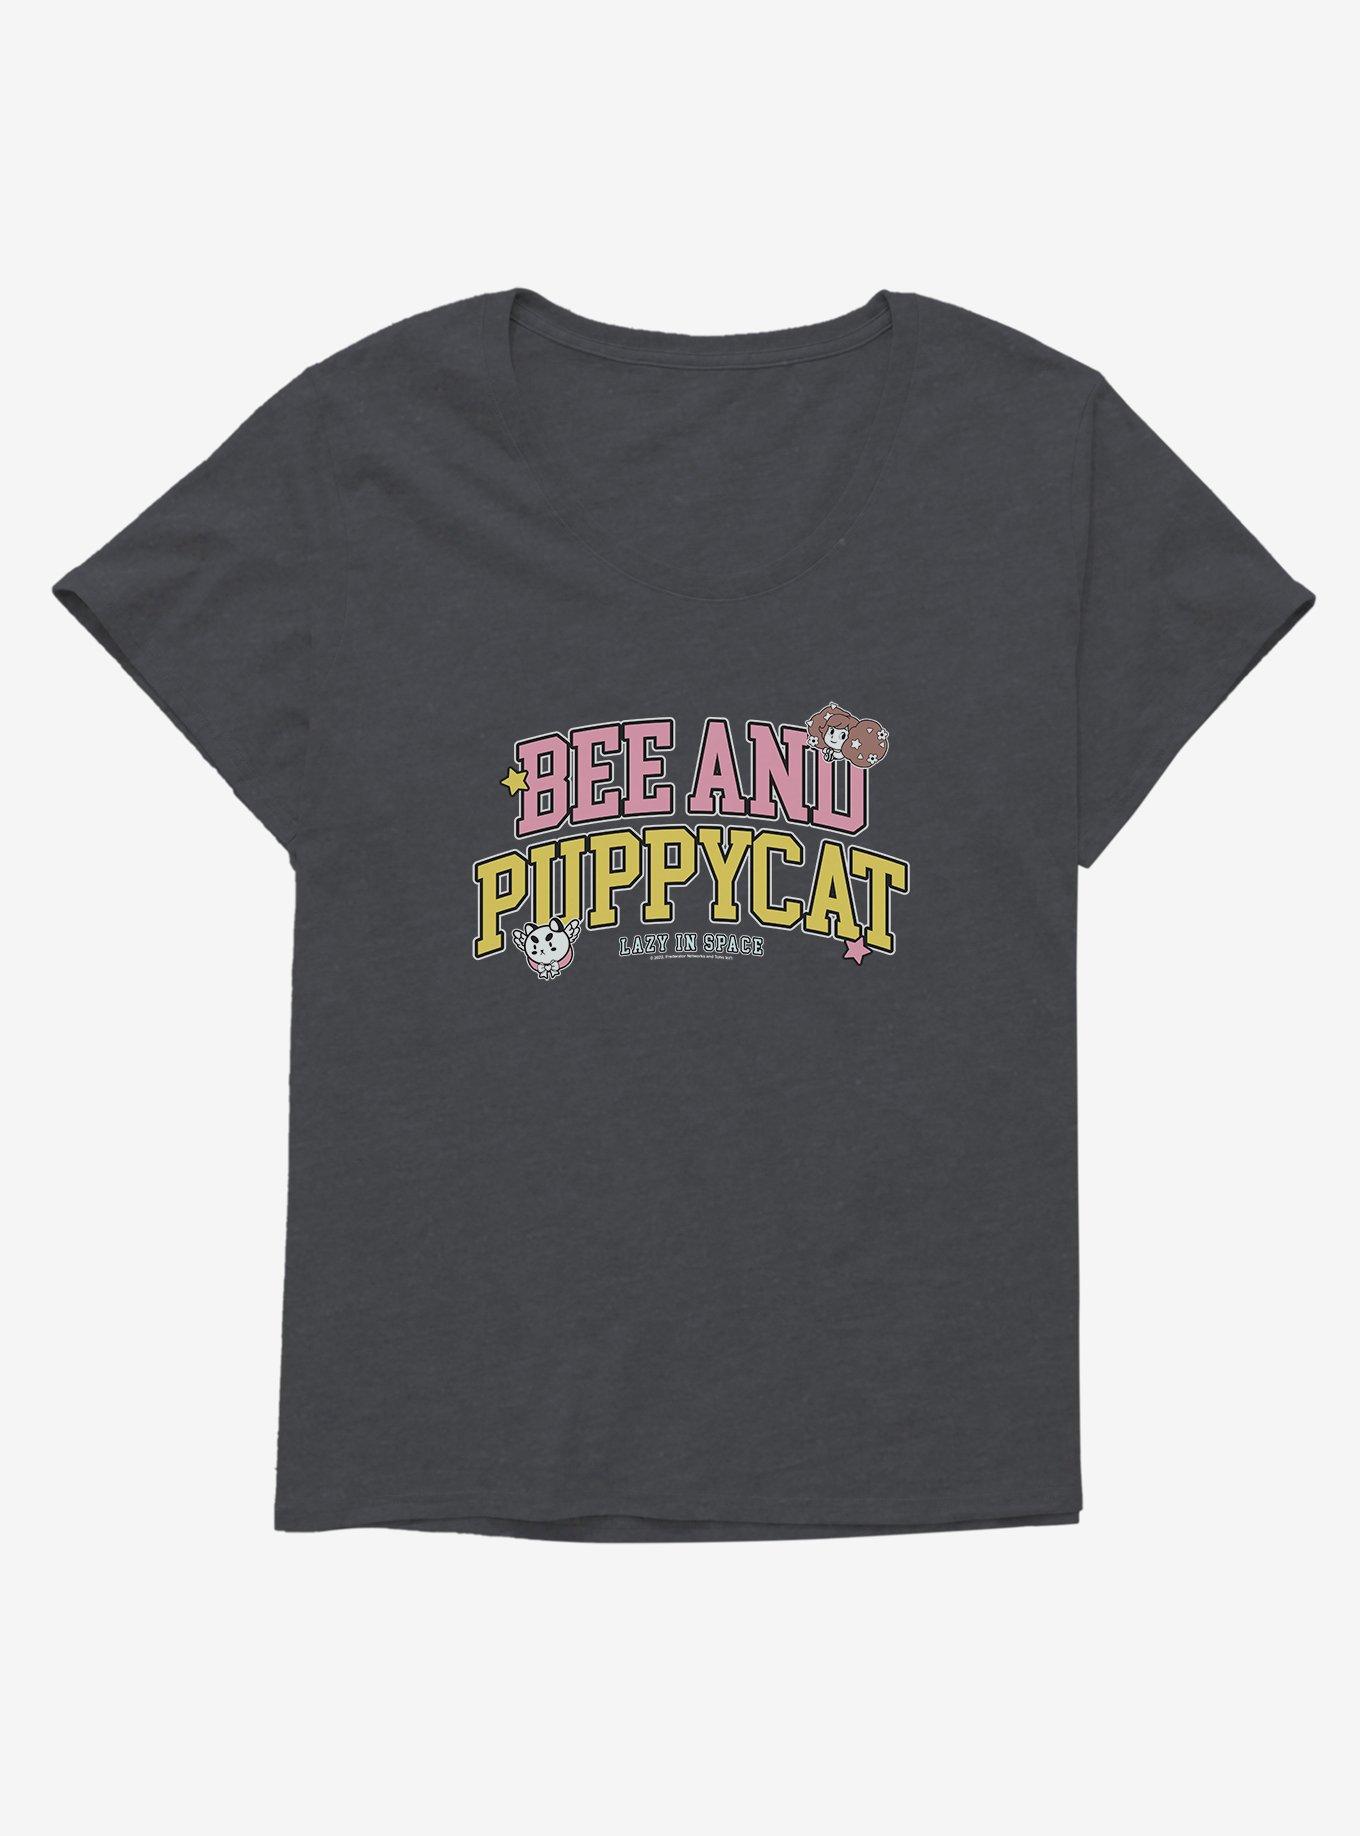 Bee And Puppycat Lazy In Space Collegiate Girls T-Shirt Plus Size, , hi-res